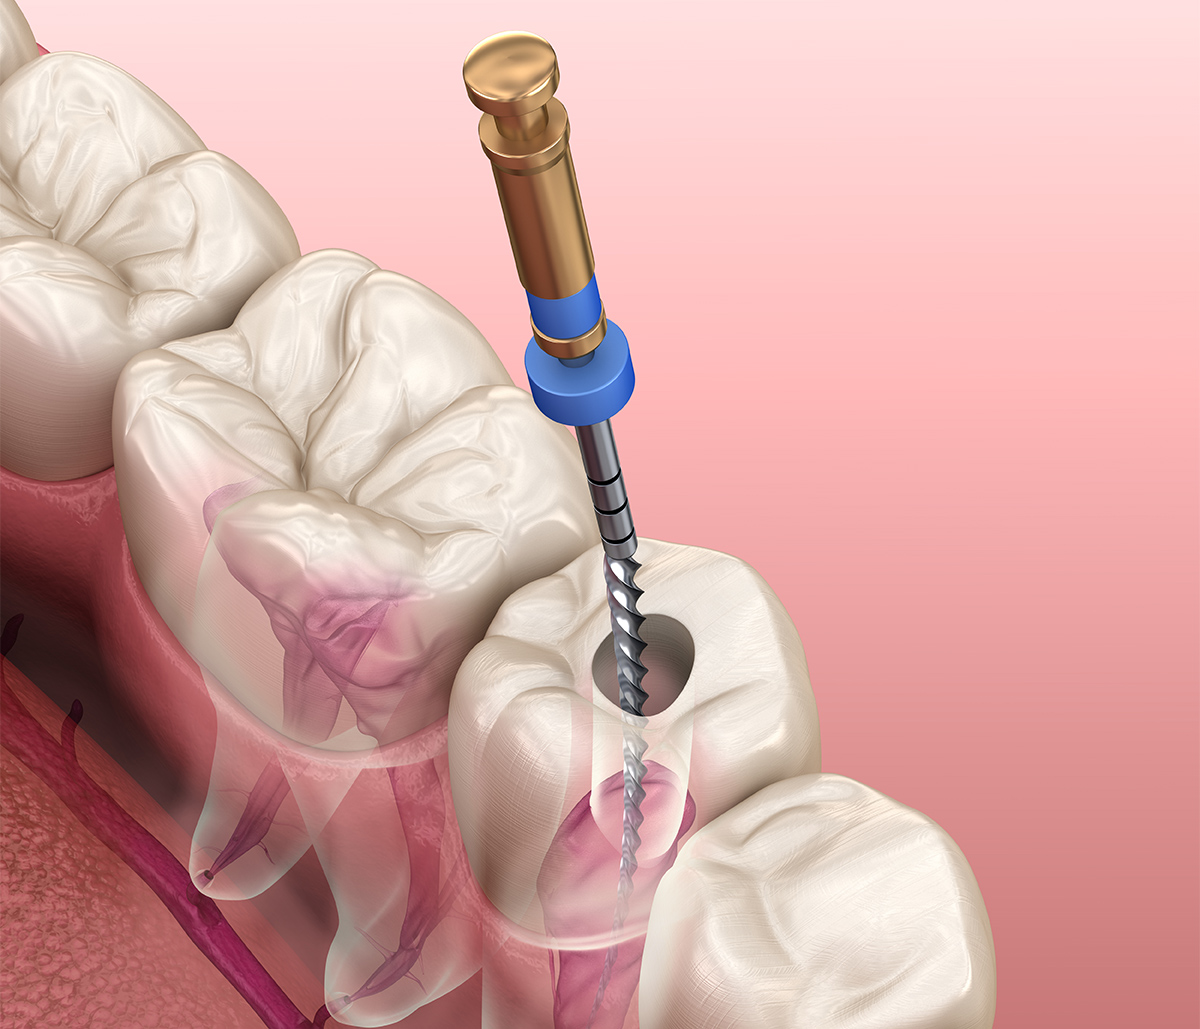 Painless Root Canals with Sedation in Greensboro NC Area